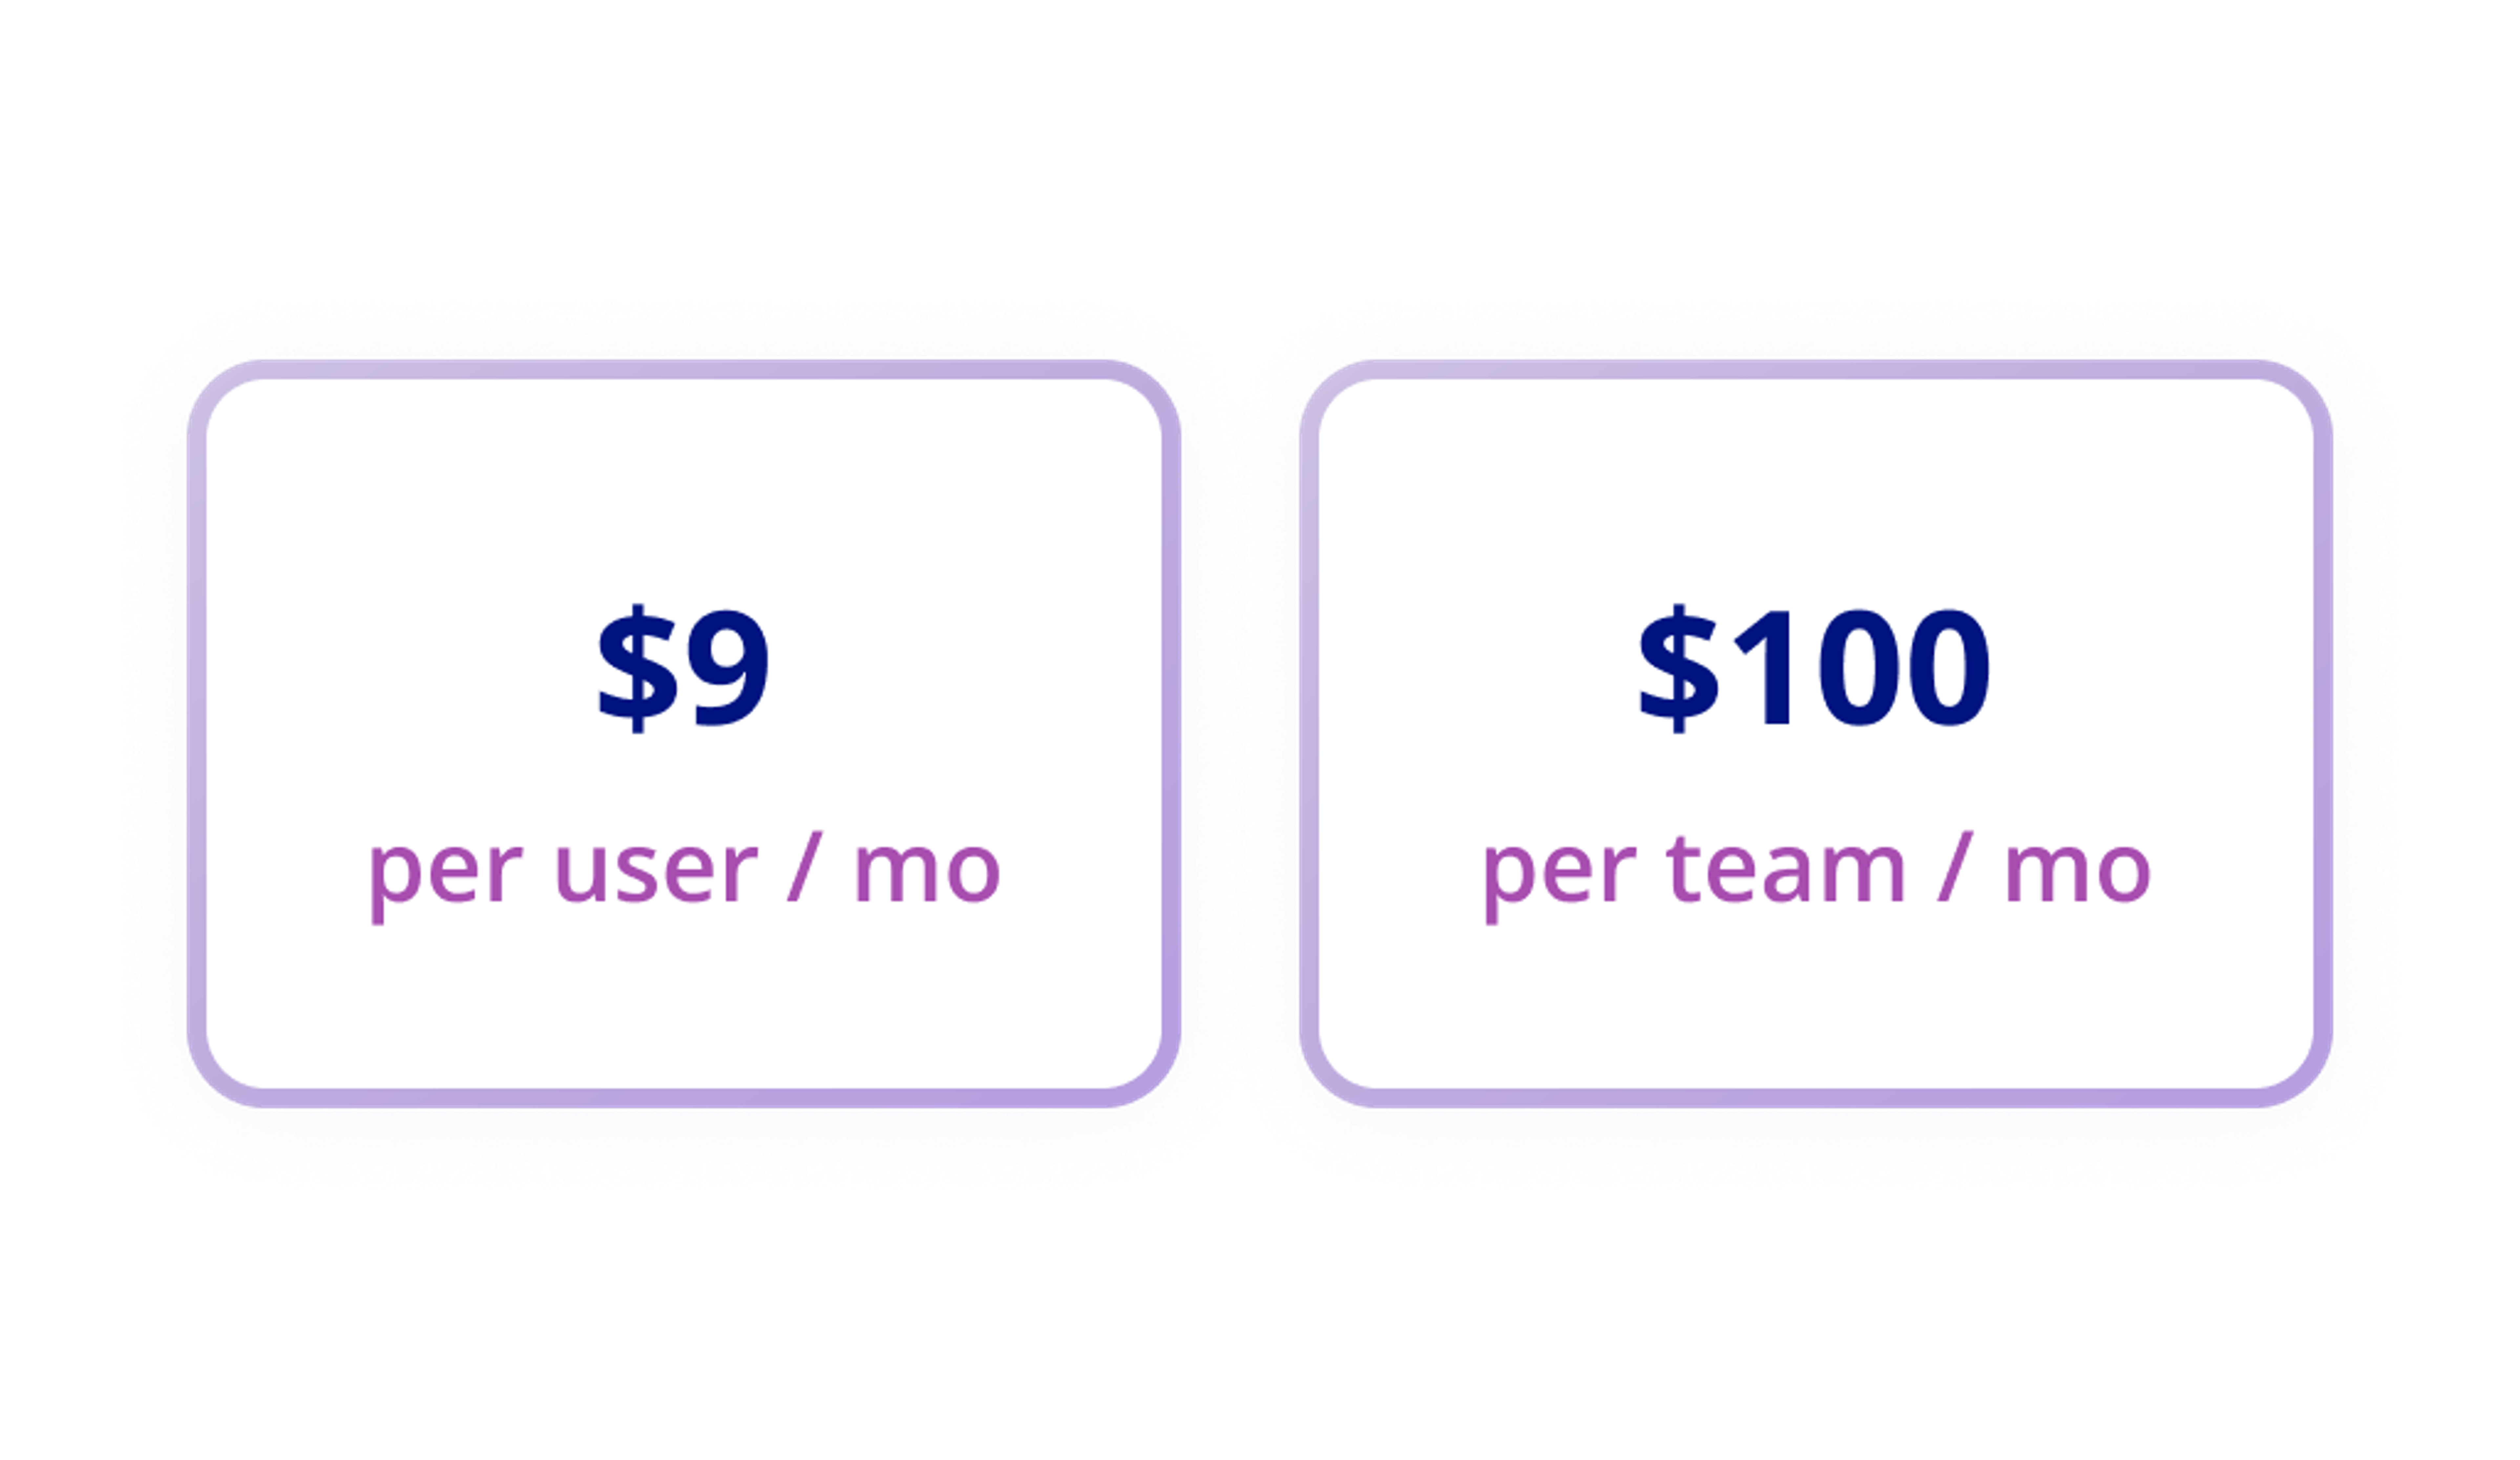 Transparent pricing for simplified scaling